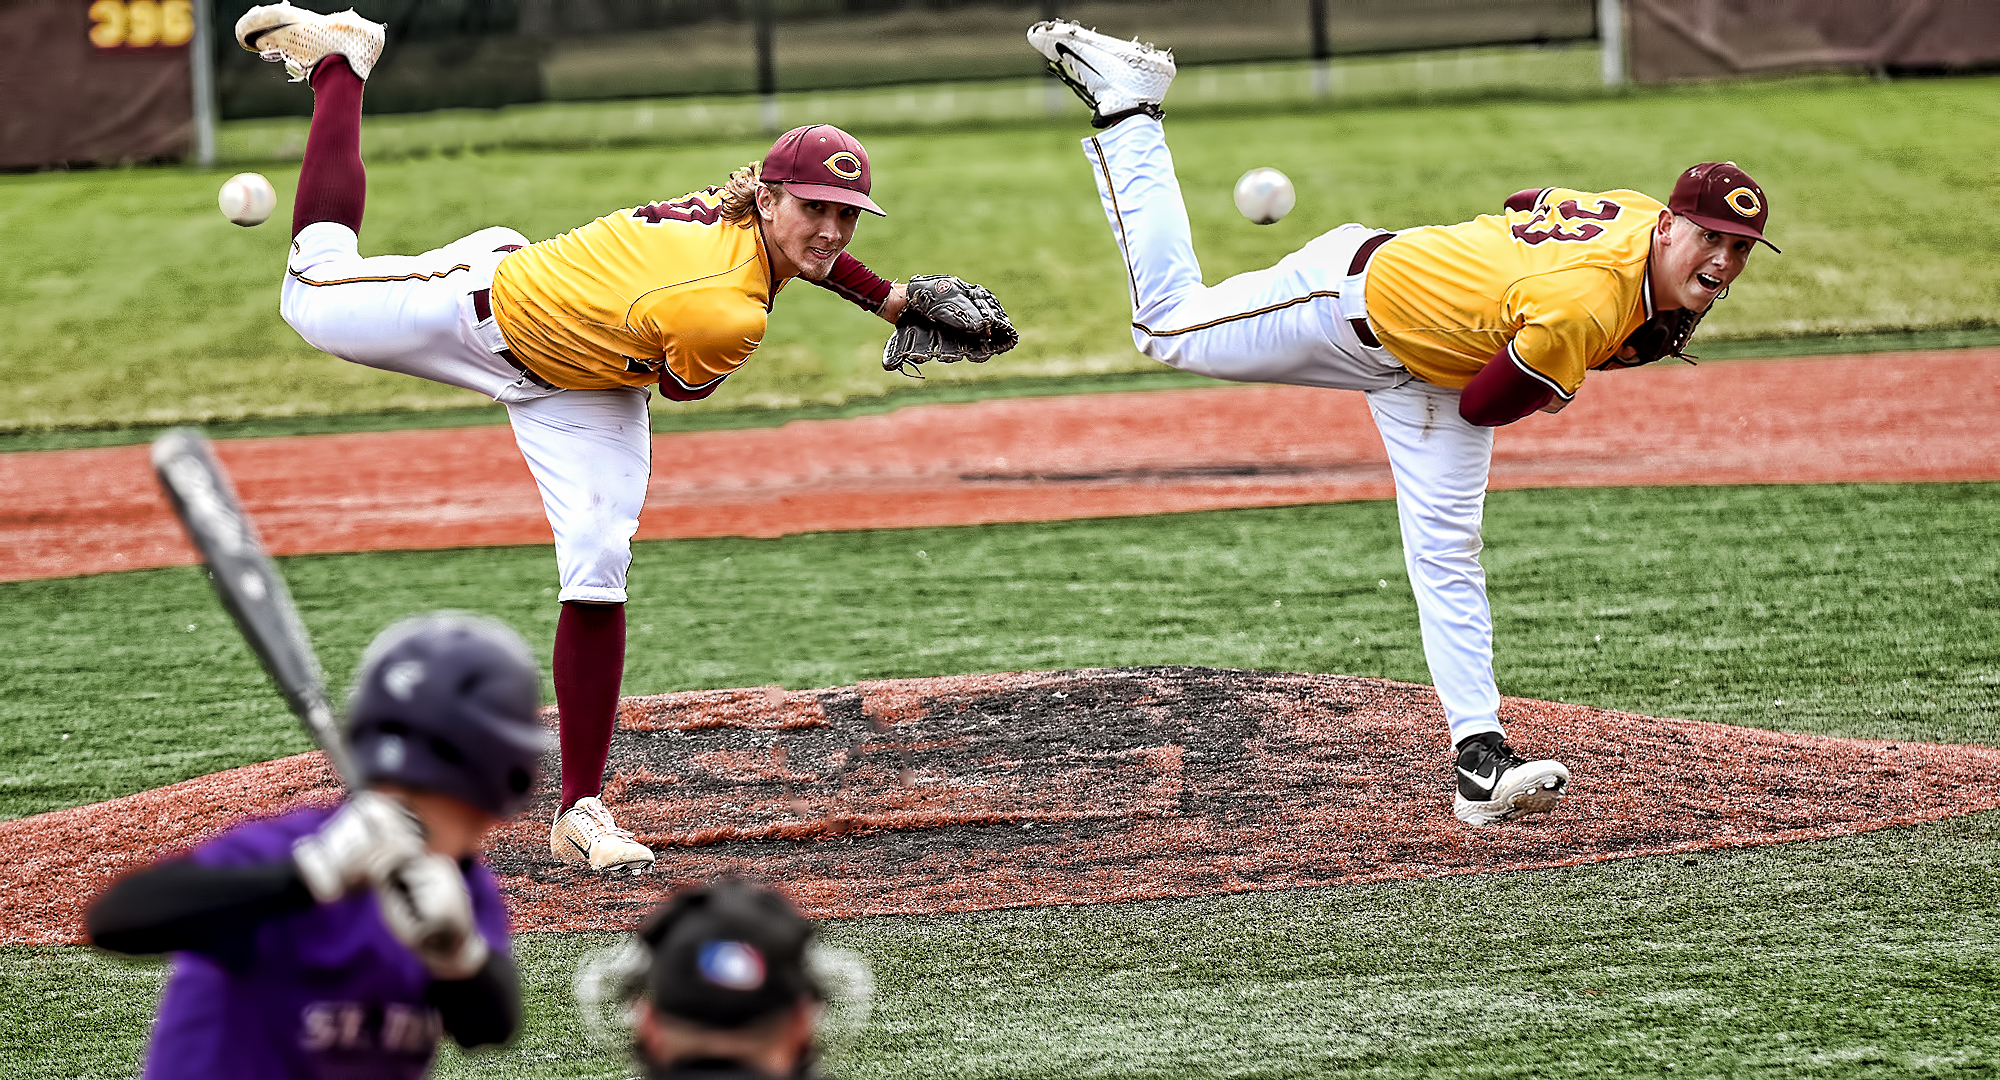 Cobber starting pitchers Austin Ver Steeg (L) and Cole Christensen both threw complete-game gems to help Concordia sweep St. Thomas.